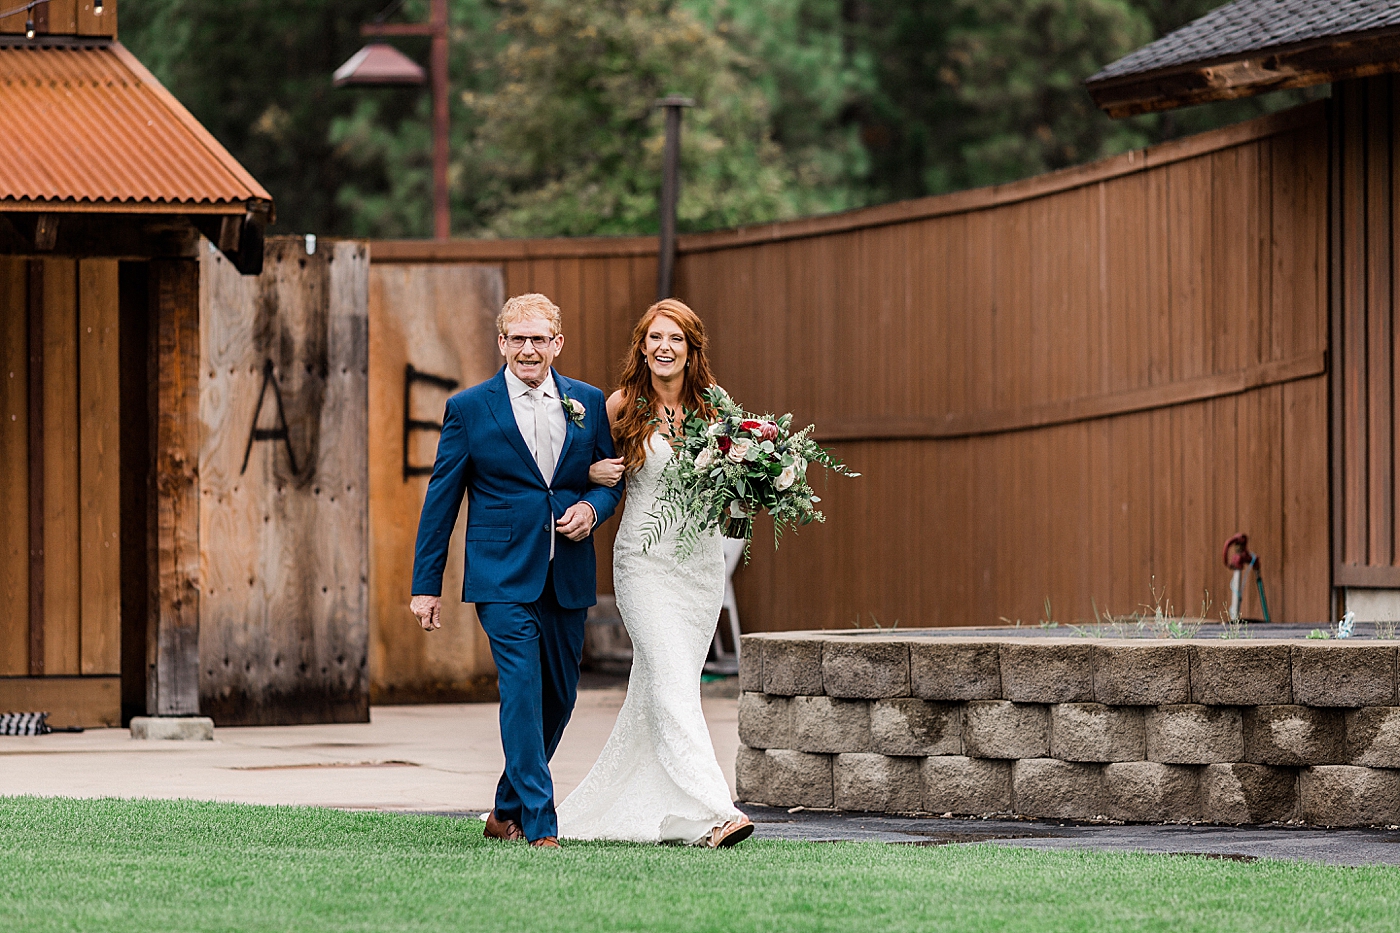 Bride and father walking down the aisle | Megan Montalvo Photography